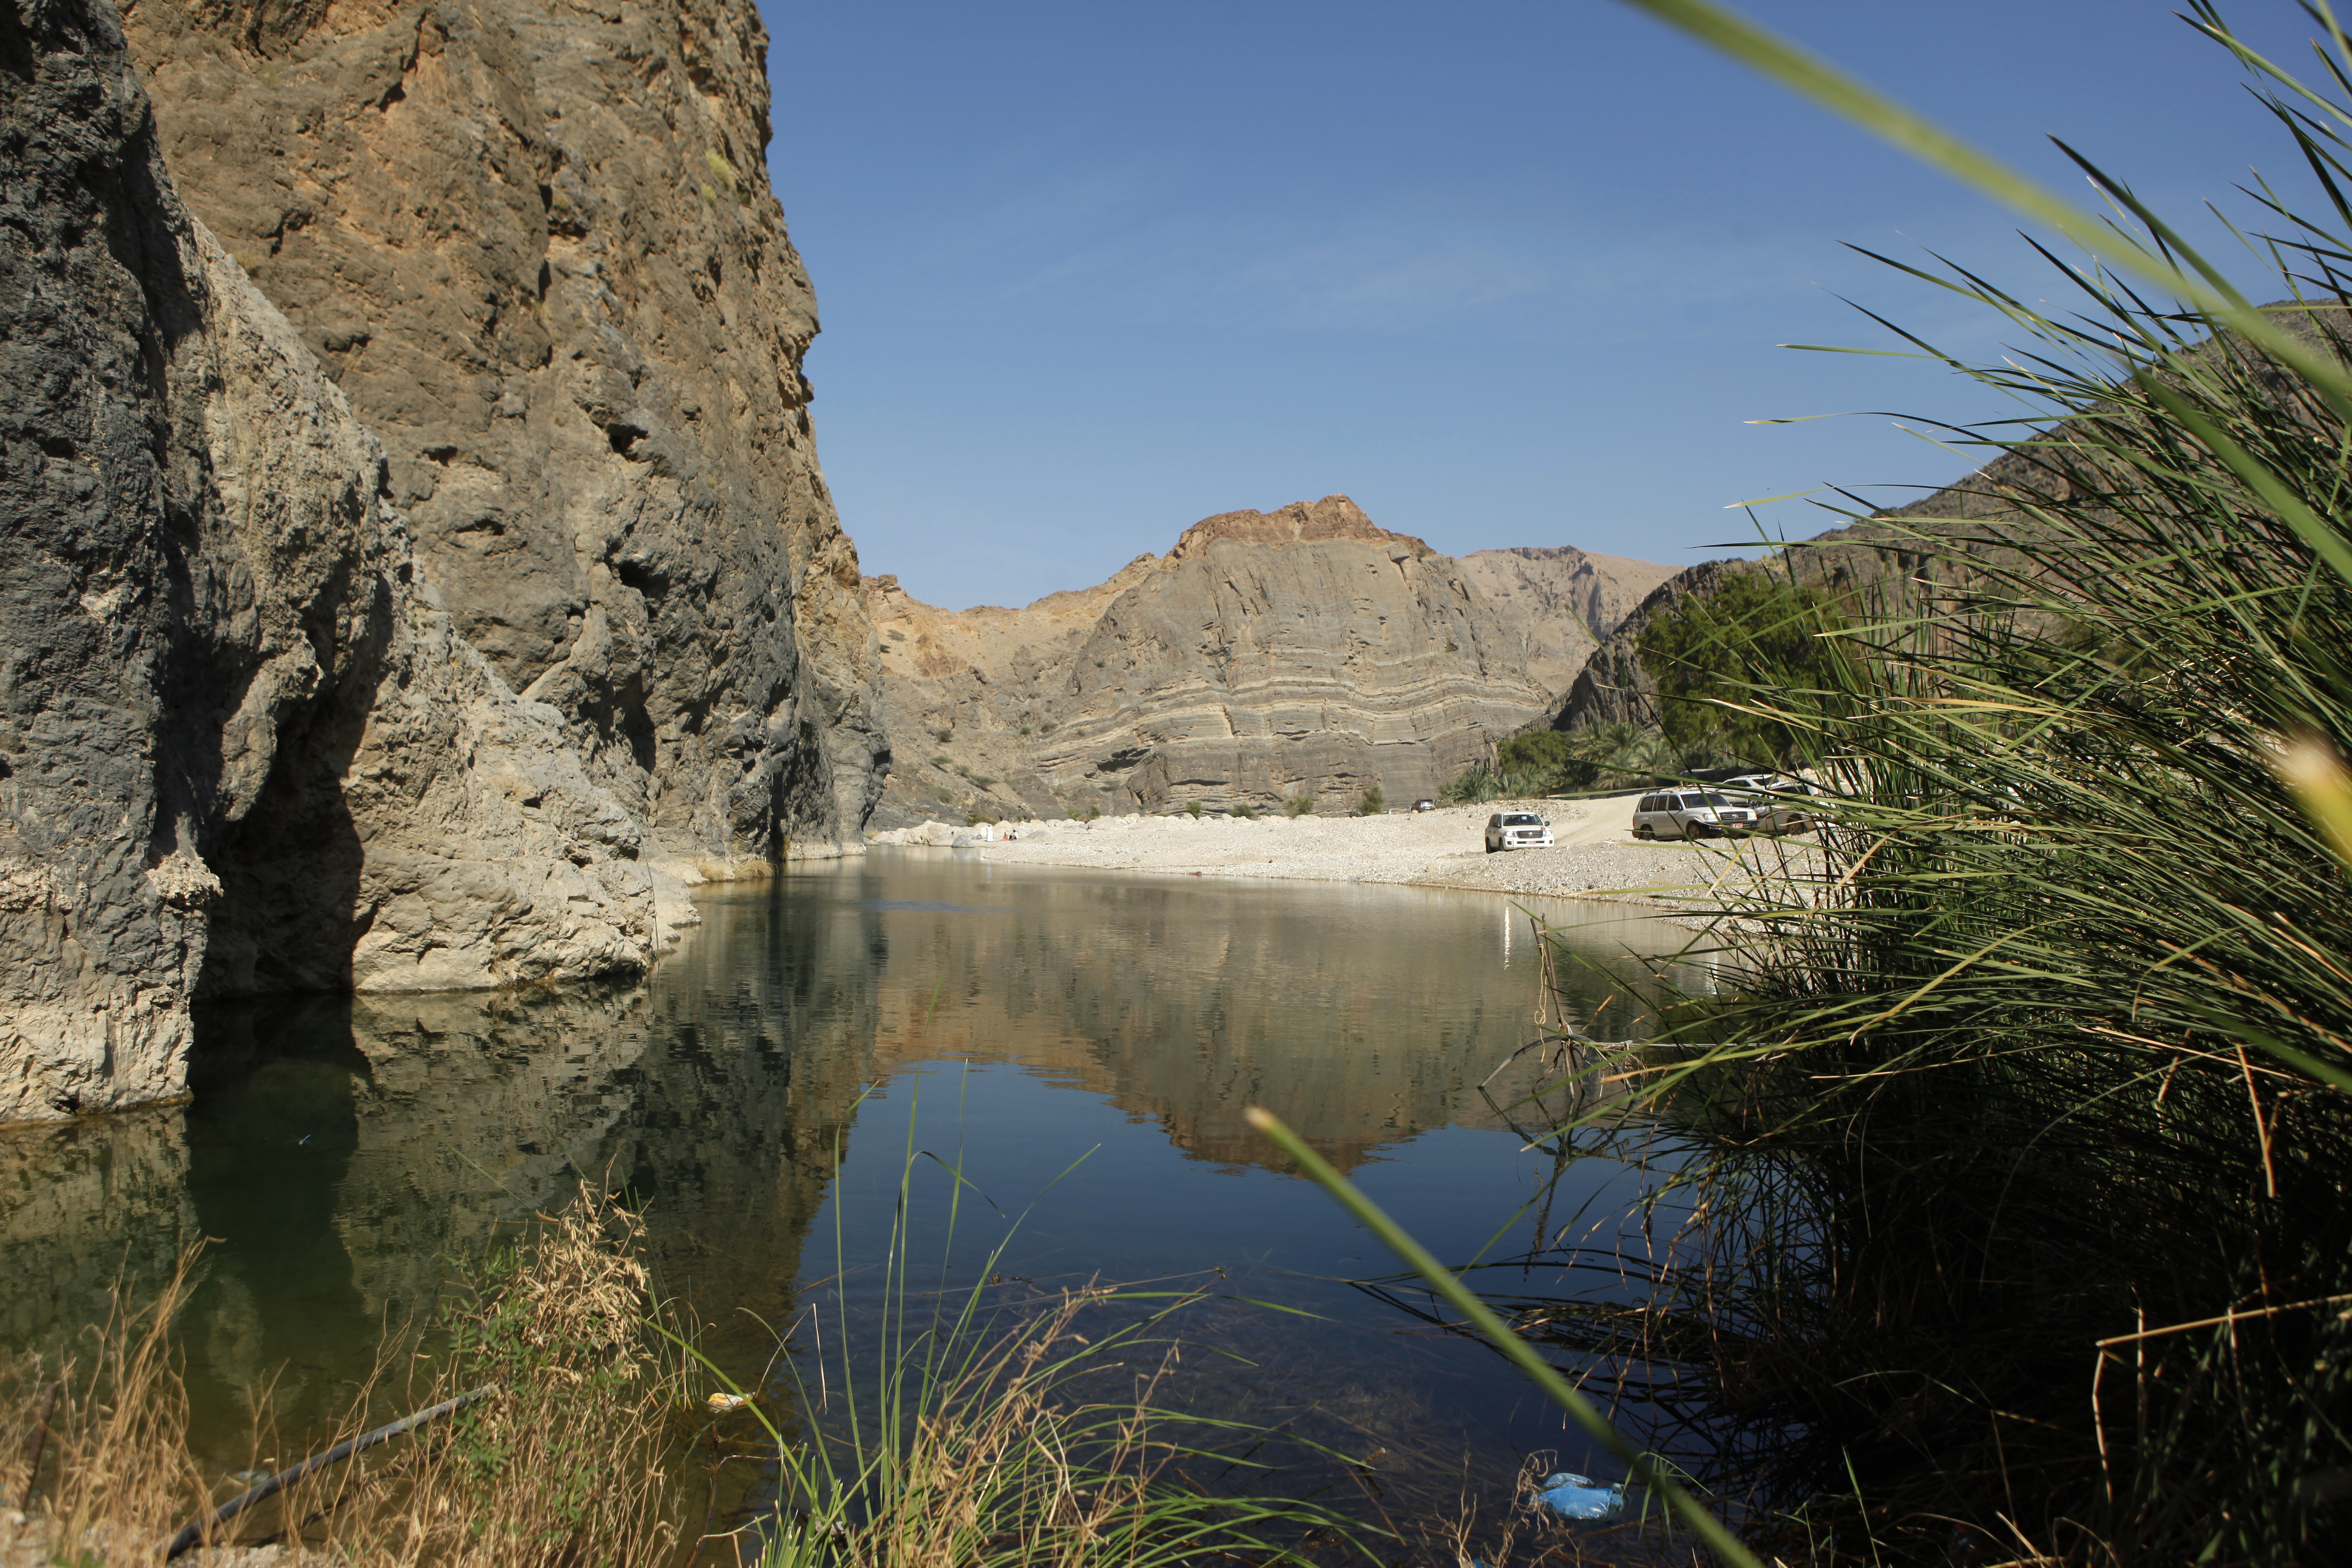 Oman Tourism: Wadi Al Arbaeen, perfect place to cool off with adventure